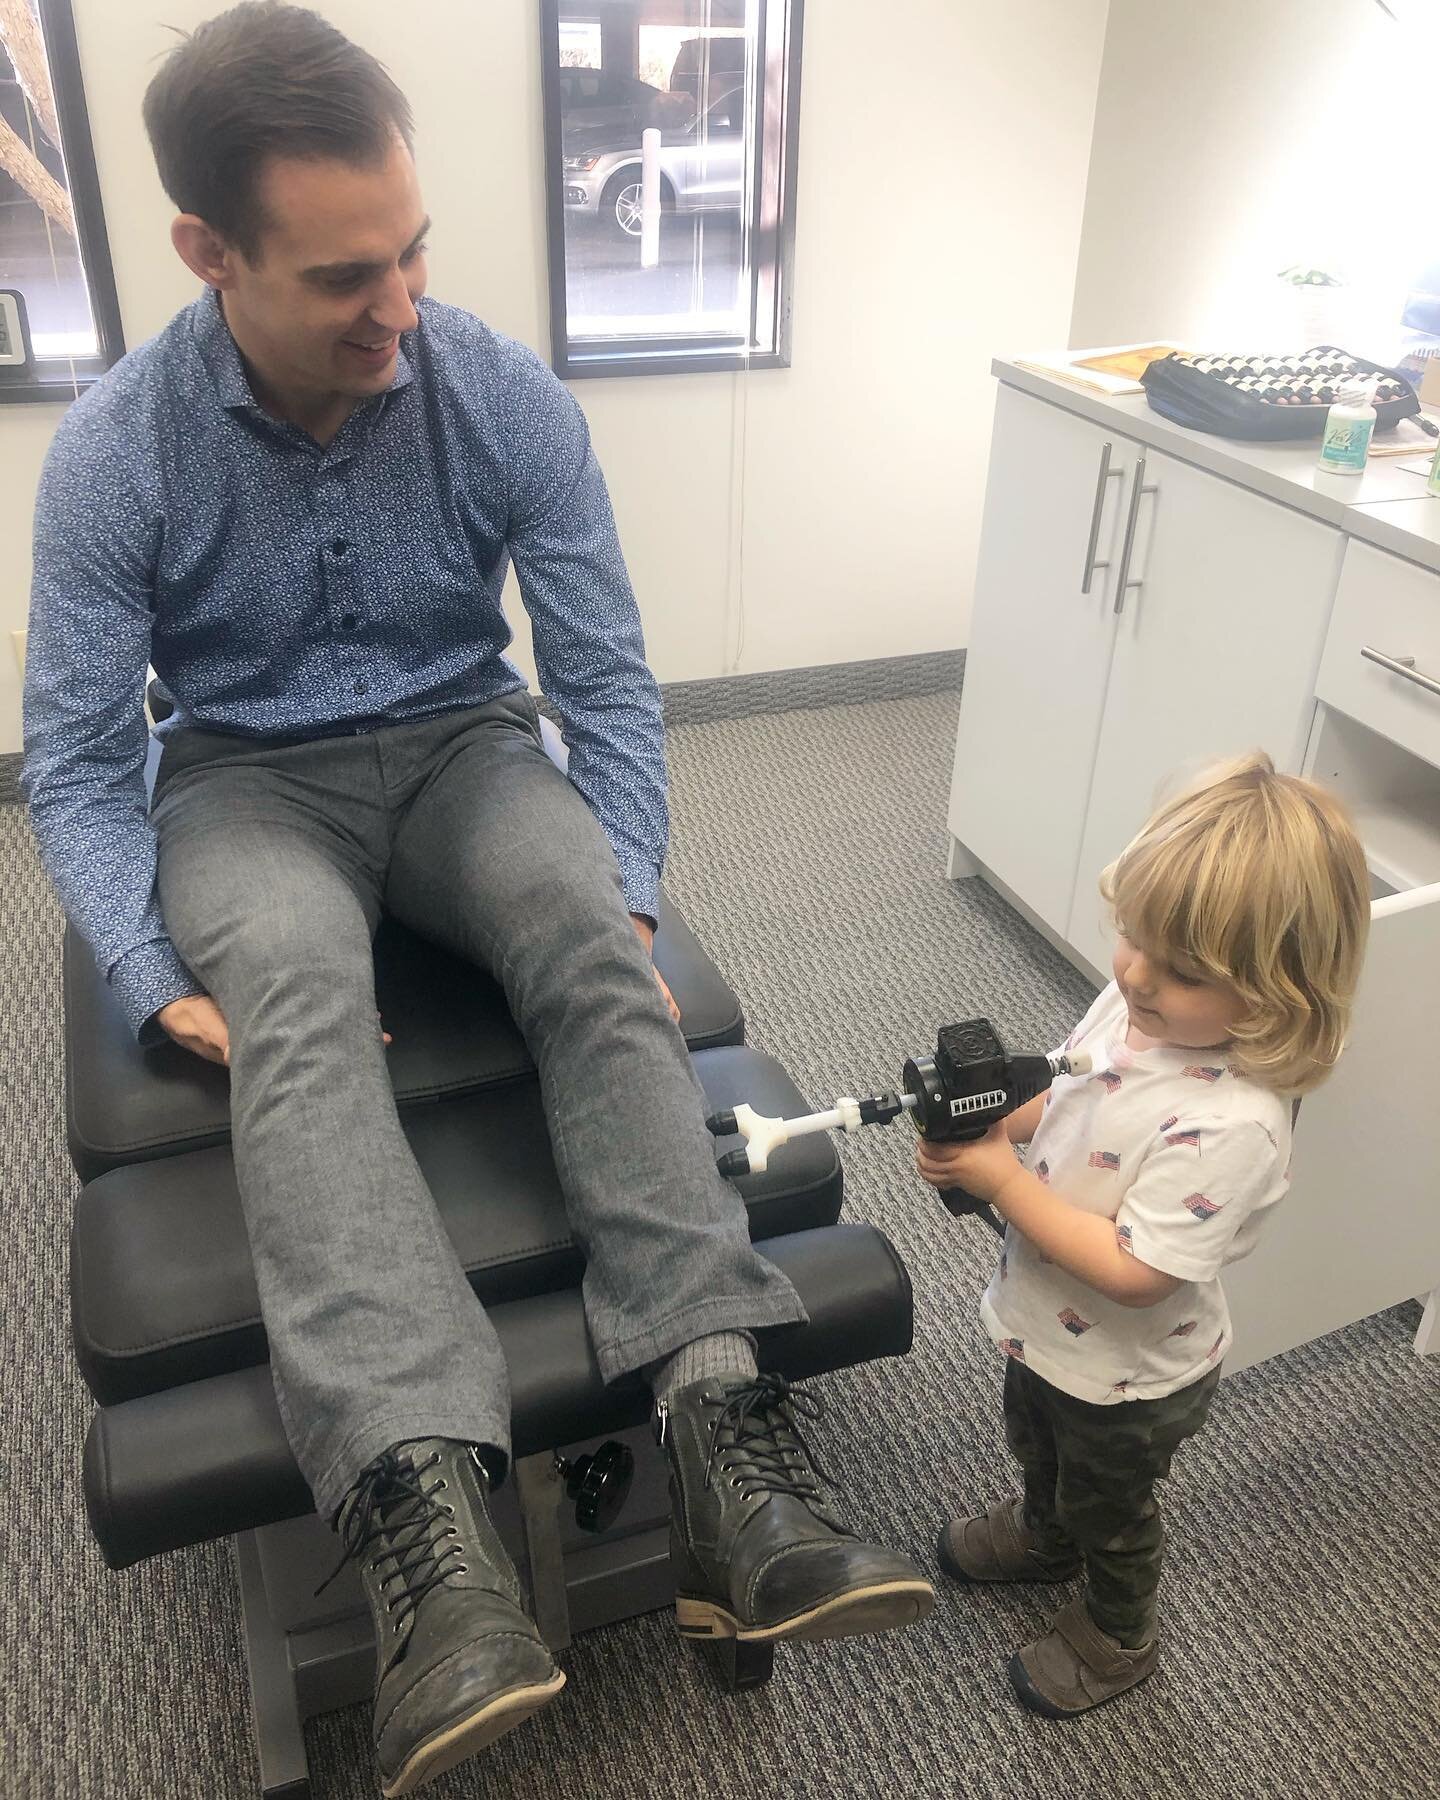 Wrapping up our 2nd day in our new office space! Luckily one of our little patients was able to help Dr. Ethan out today with an adjustment 🙃